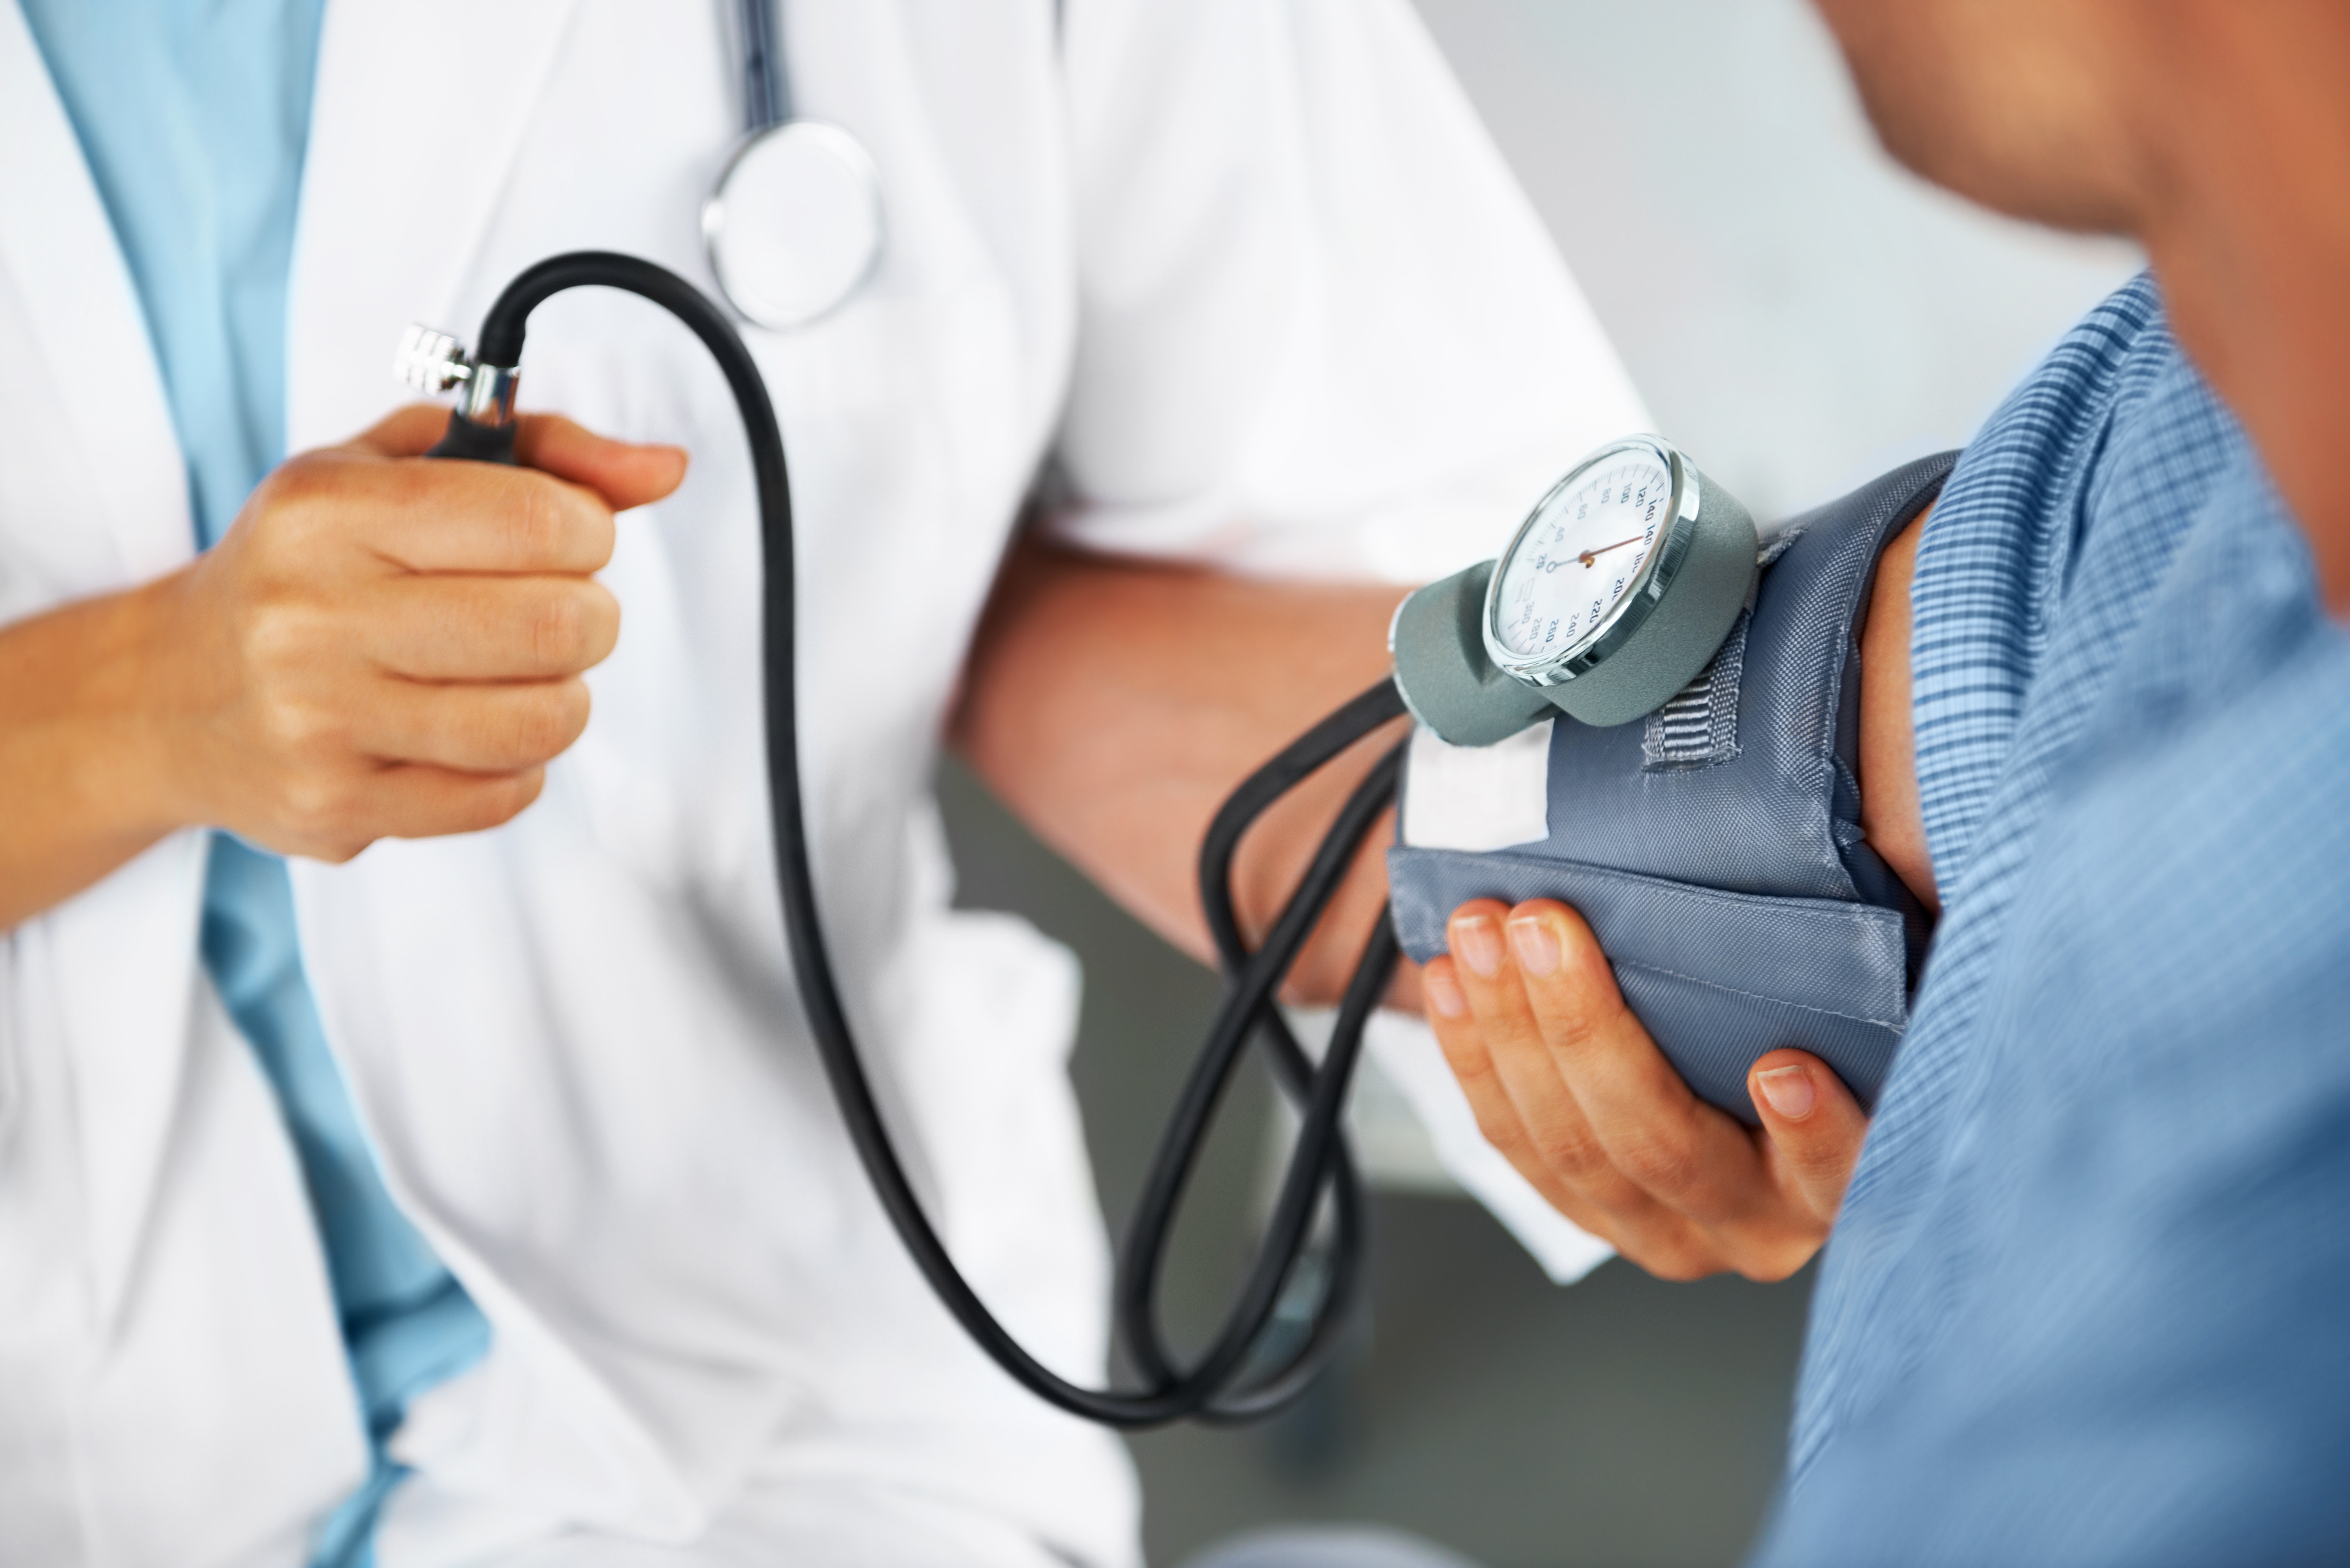 Higher Blood Pressure Associated with CKD Progression in Young Adults